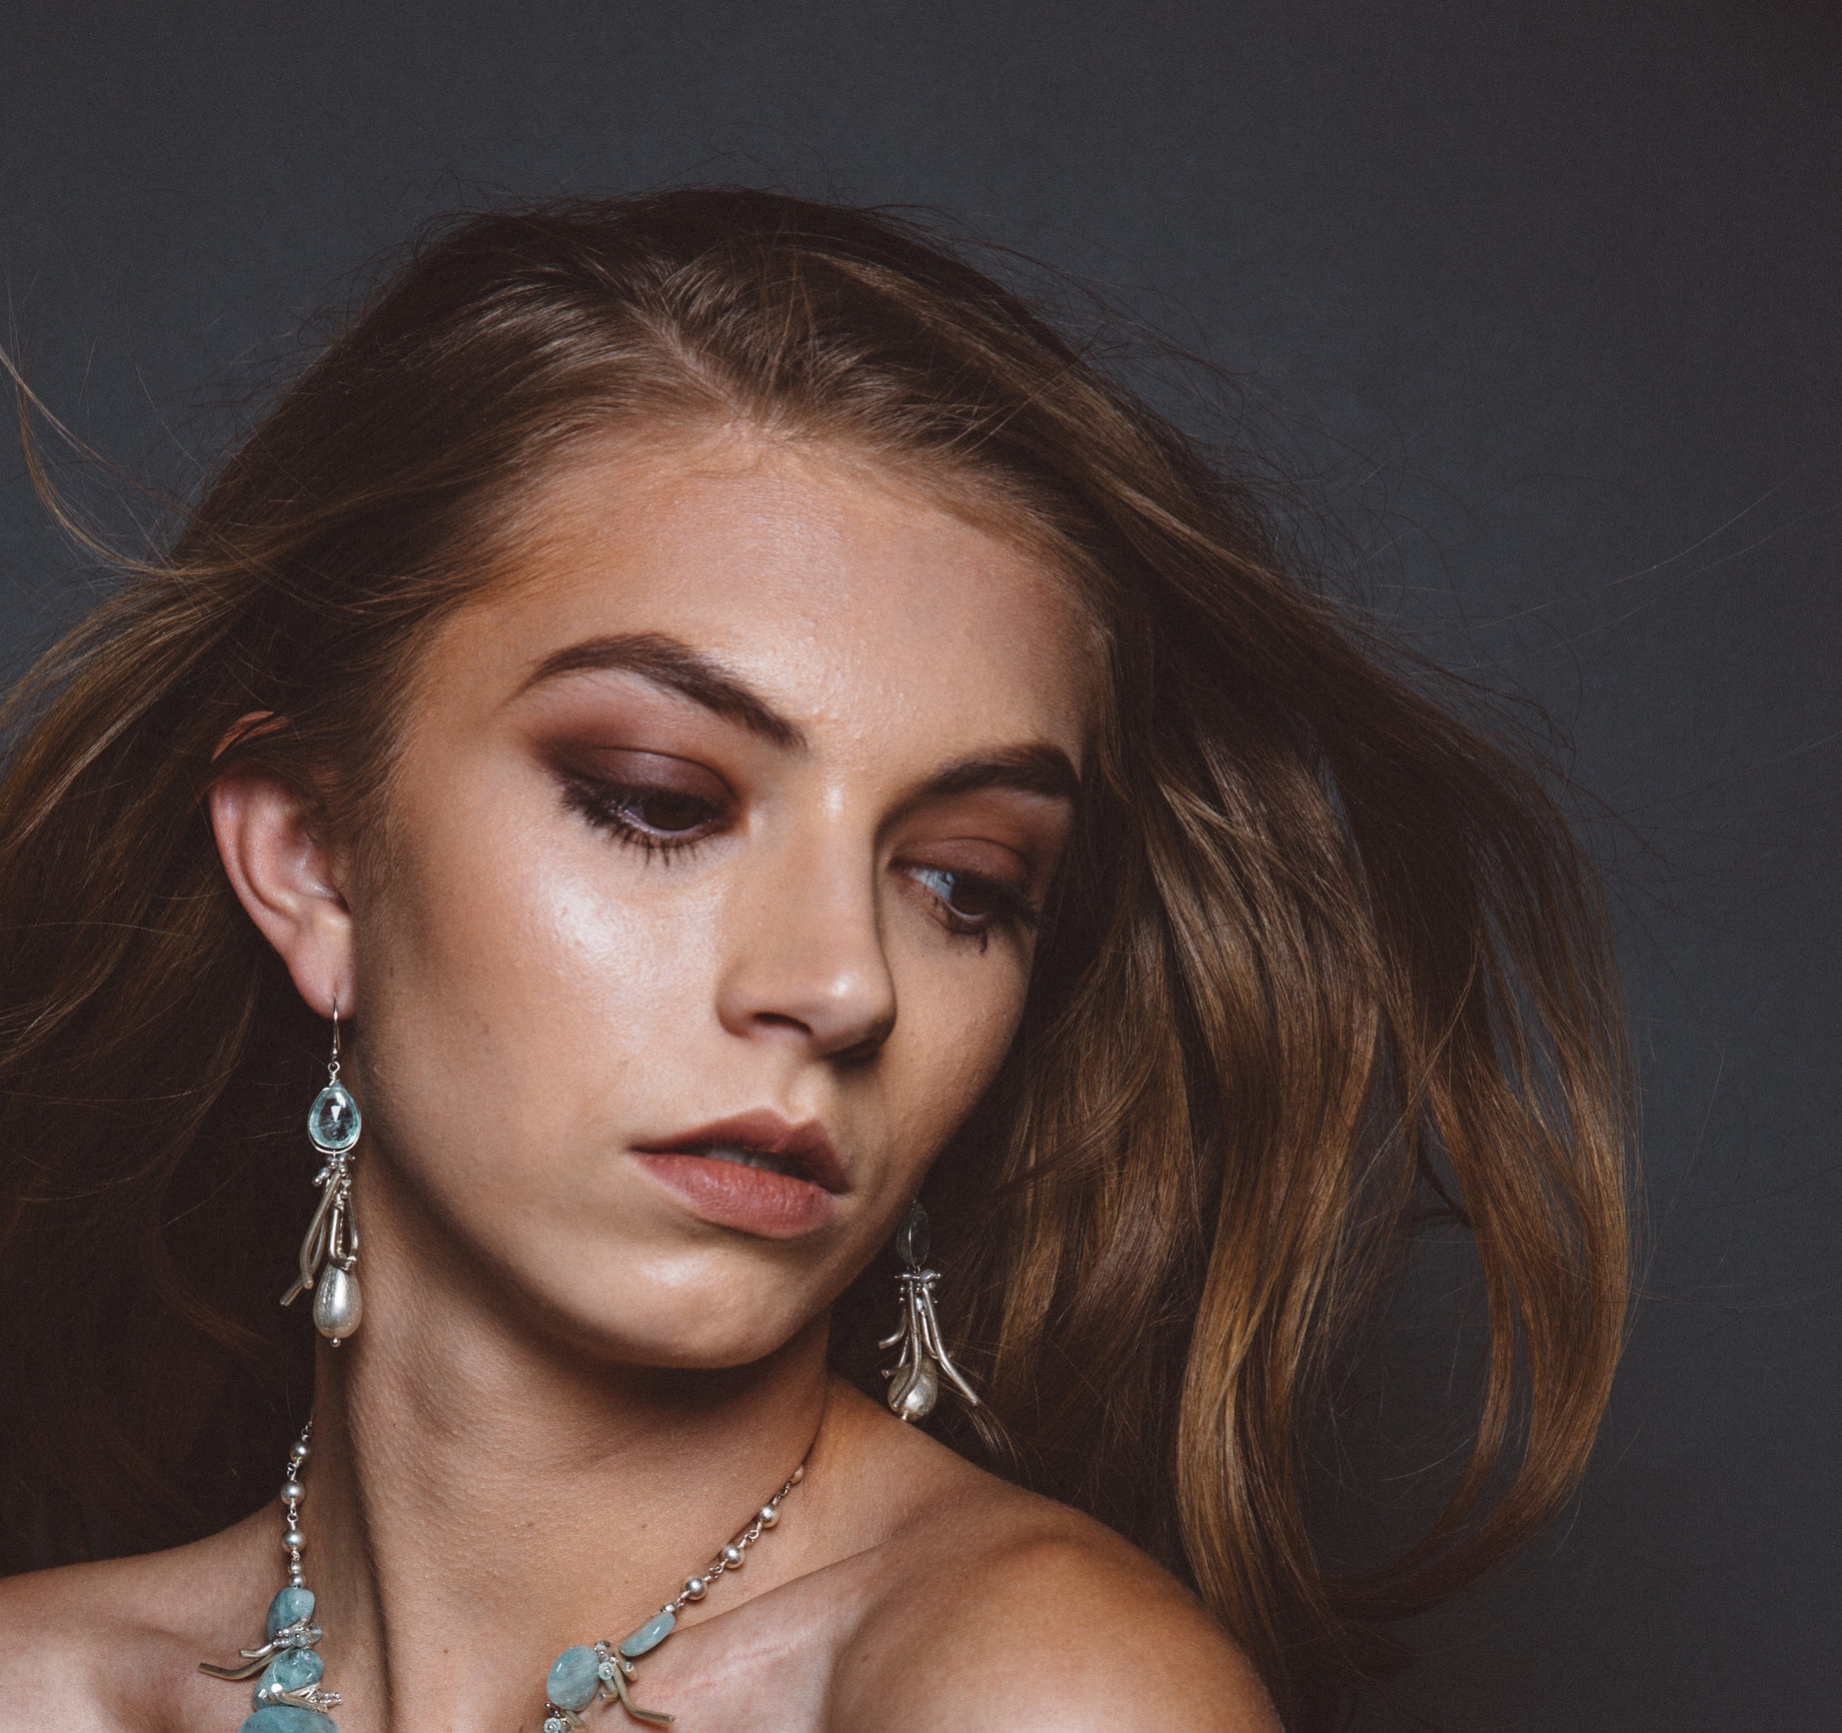 model wearing aquamarine earrings with hill tribe silver